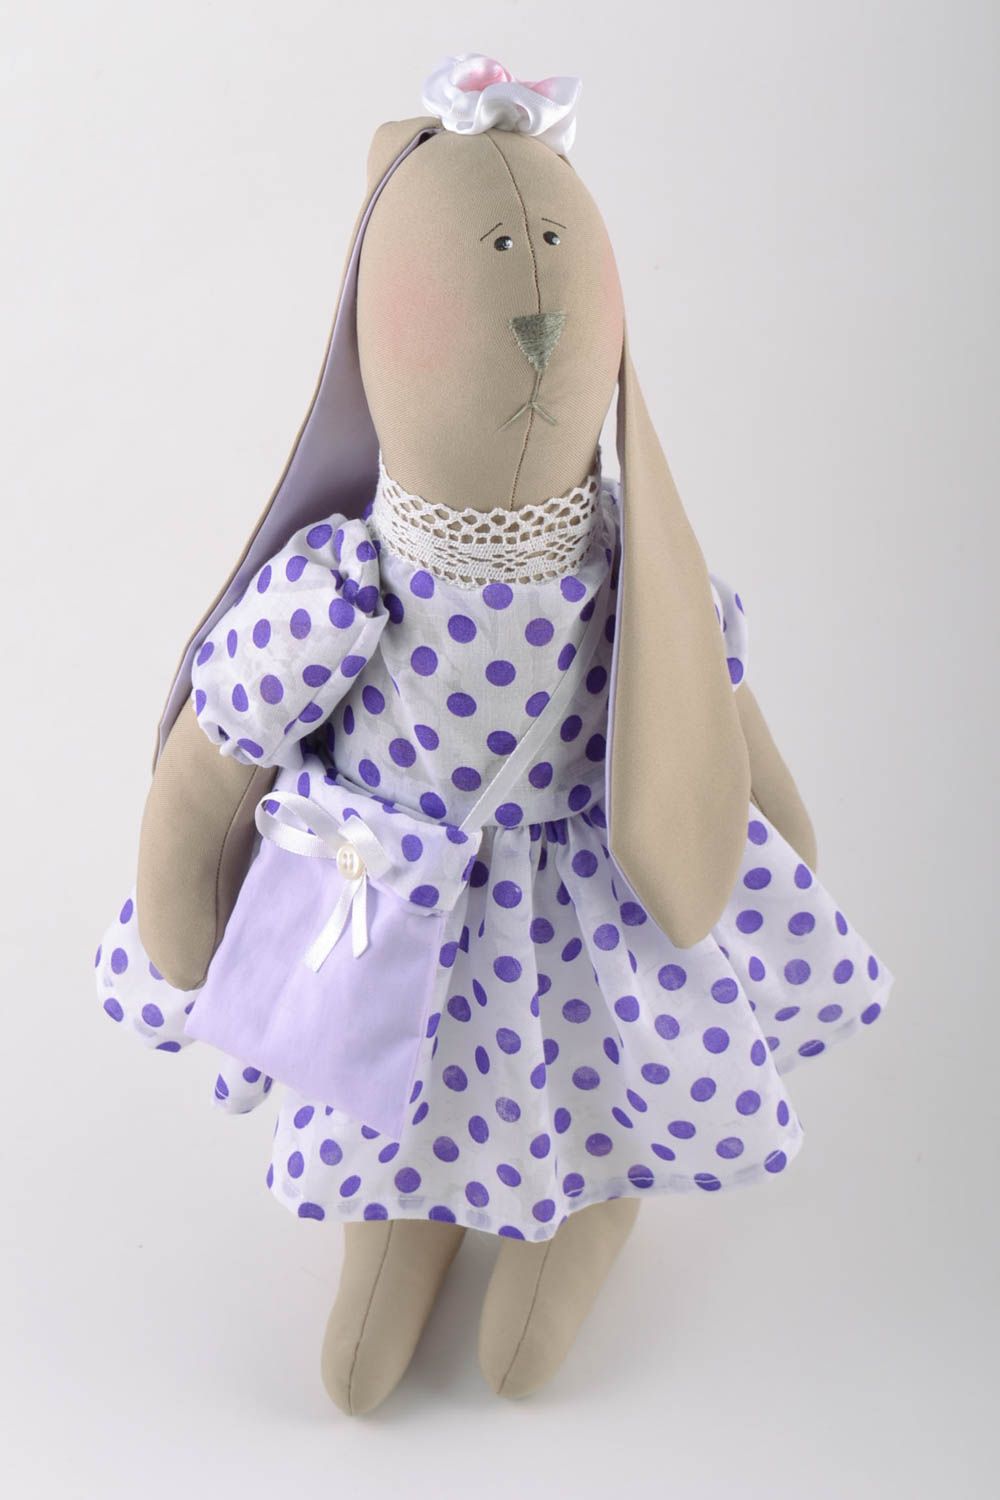 Handmade natural fabric soft toy rabbit in violet polka dot dress with bag  photo 2